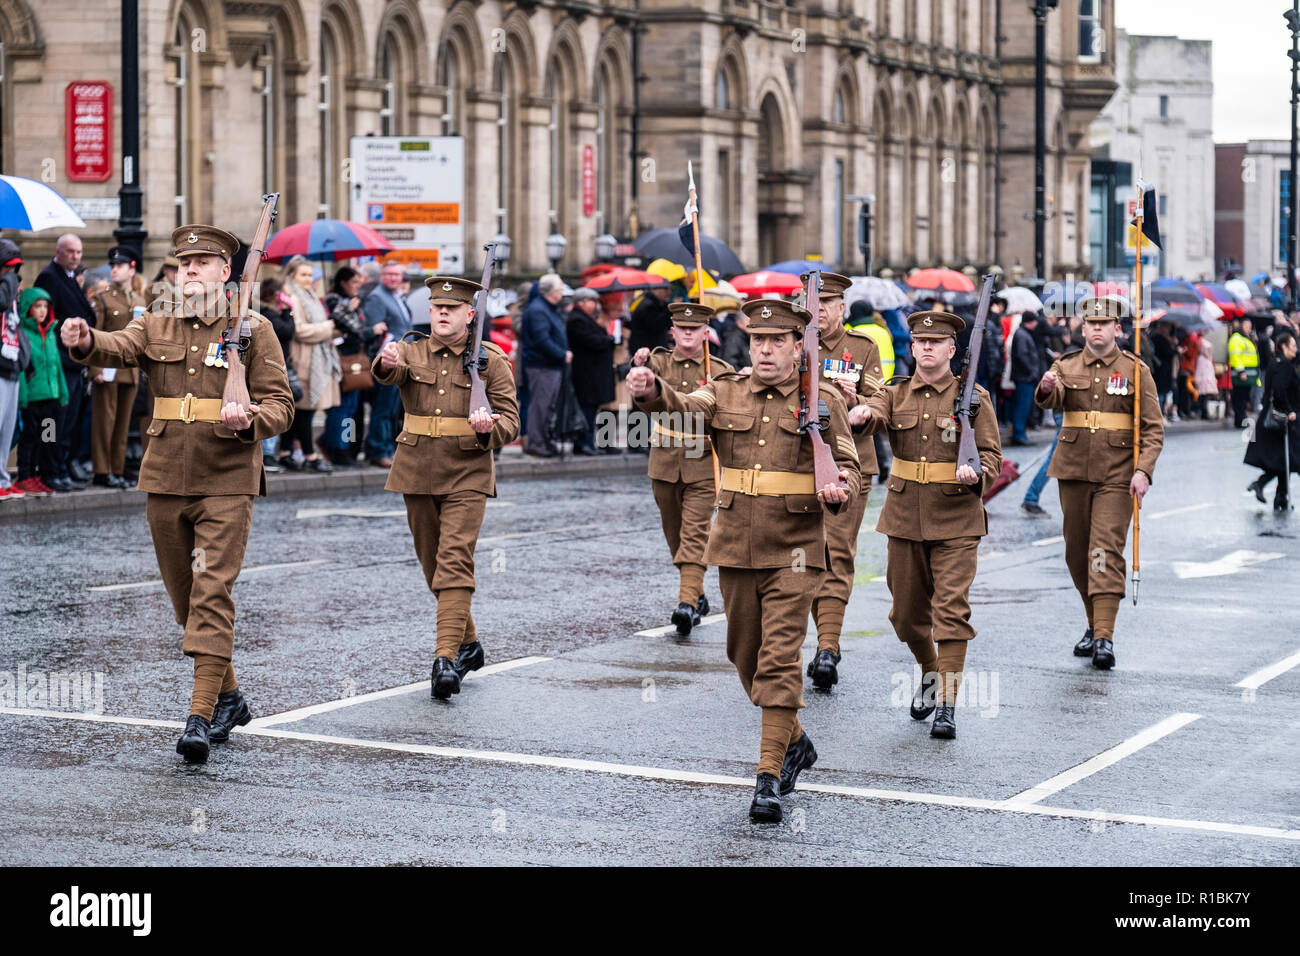 Liverpool, UK. Nov 11, 2018: A small number of serving personnel dressed in traditional World War One uniforms led the parade onto the plateau. The annual Service of Remembrance has been held on the plateau outside St George's Hall in Liverpool on Sunday, November 11, 2018, exactly 100 years to the day from the end of the First World War. Credit: Christopher Middleton/Alamy Live News Stock Photo